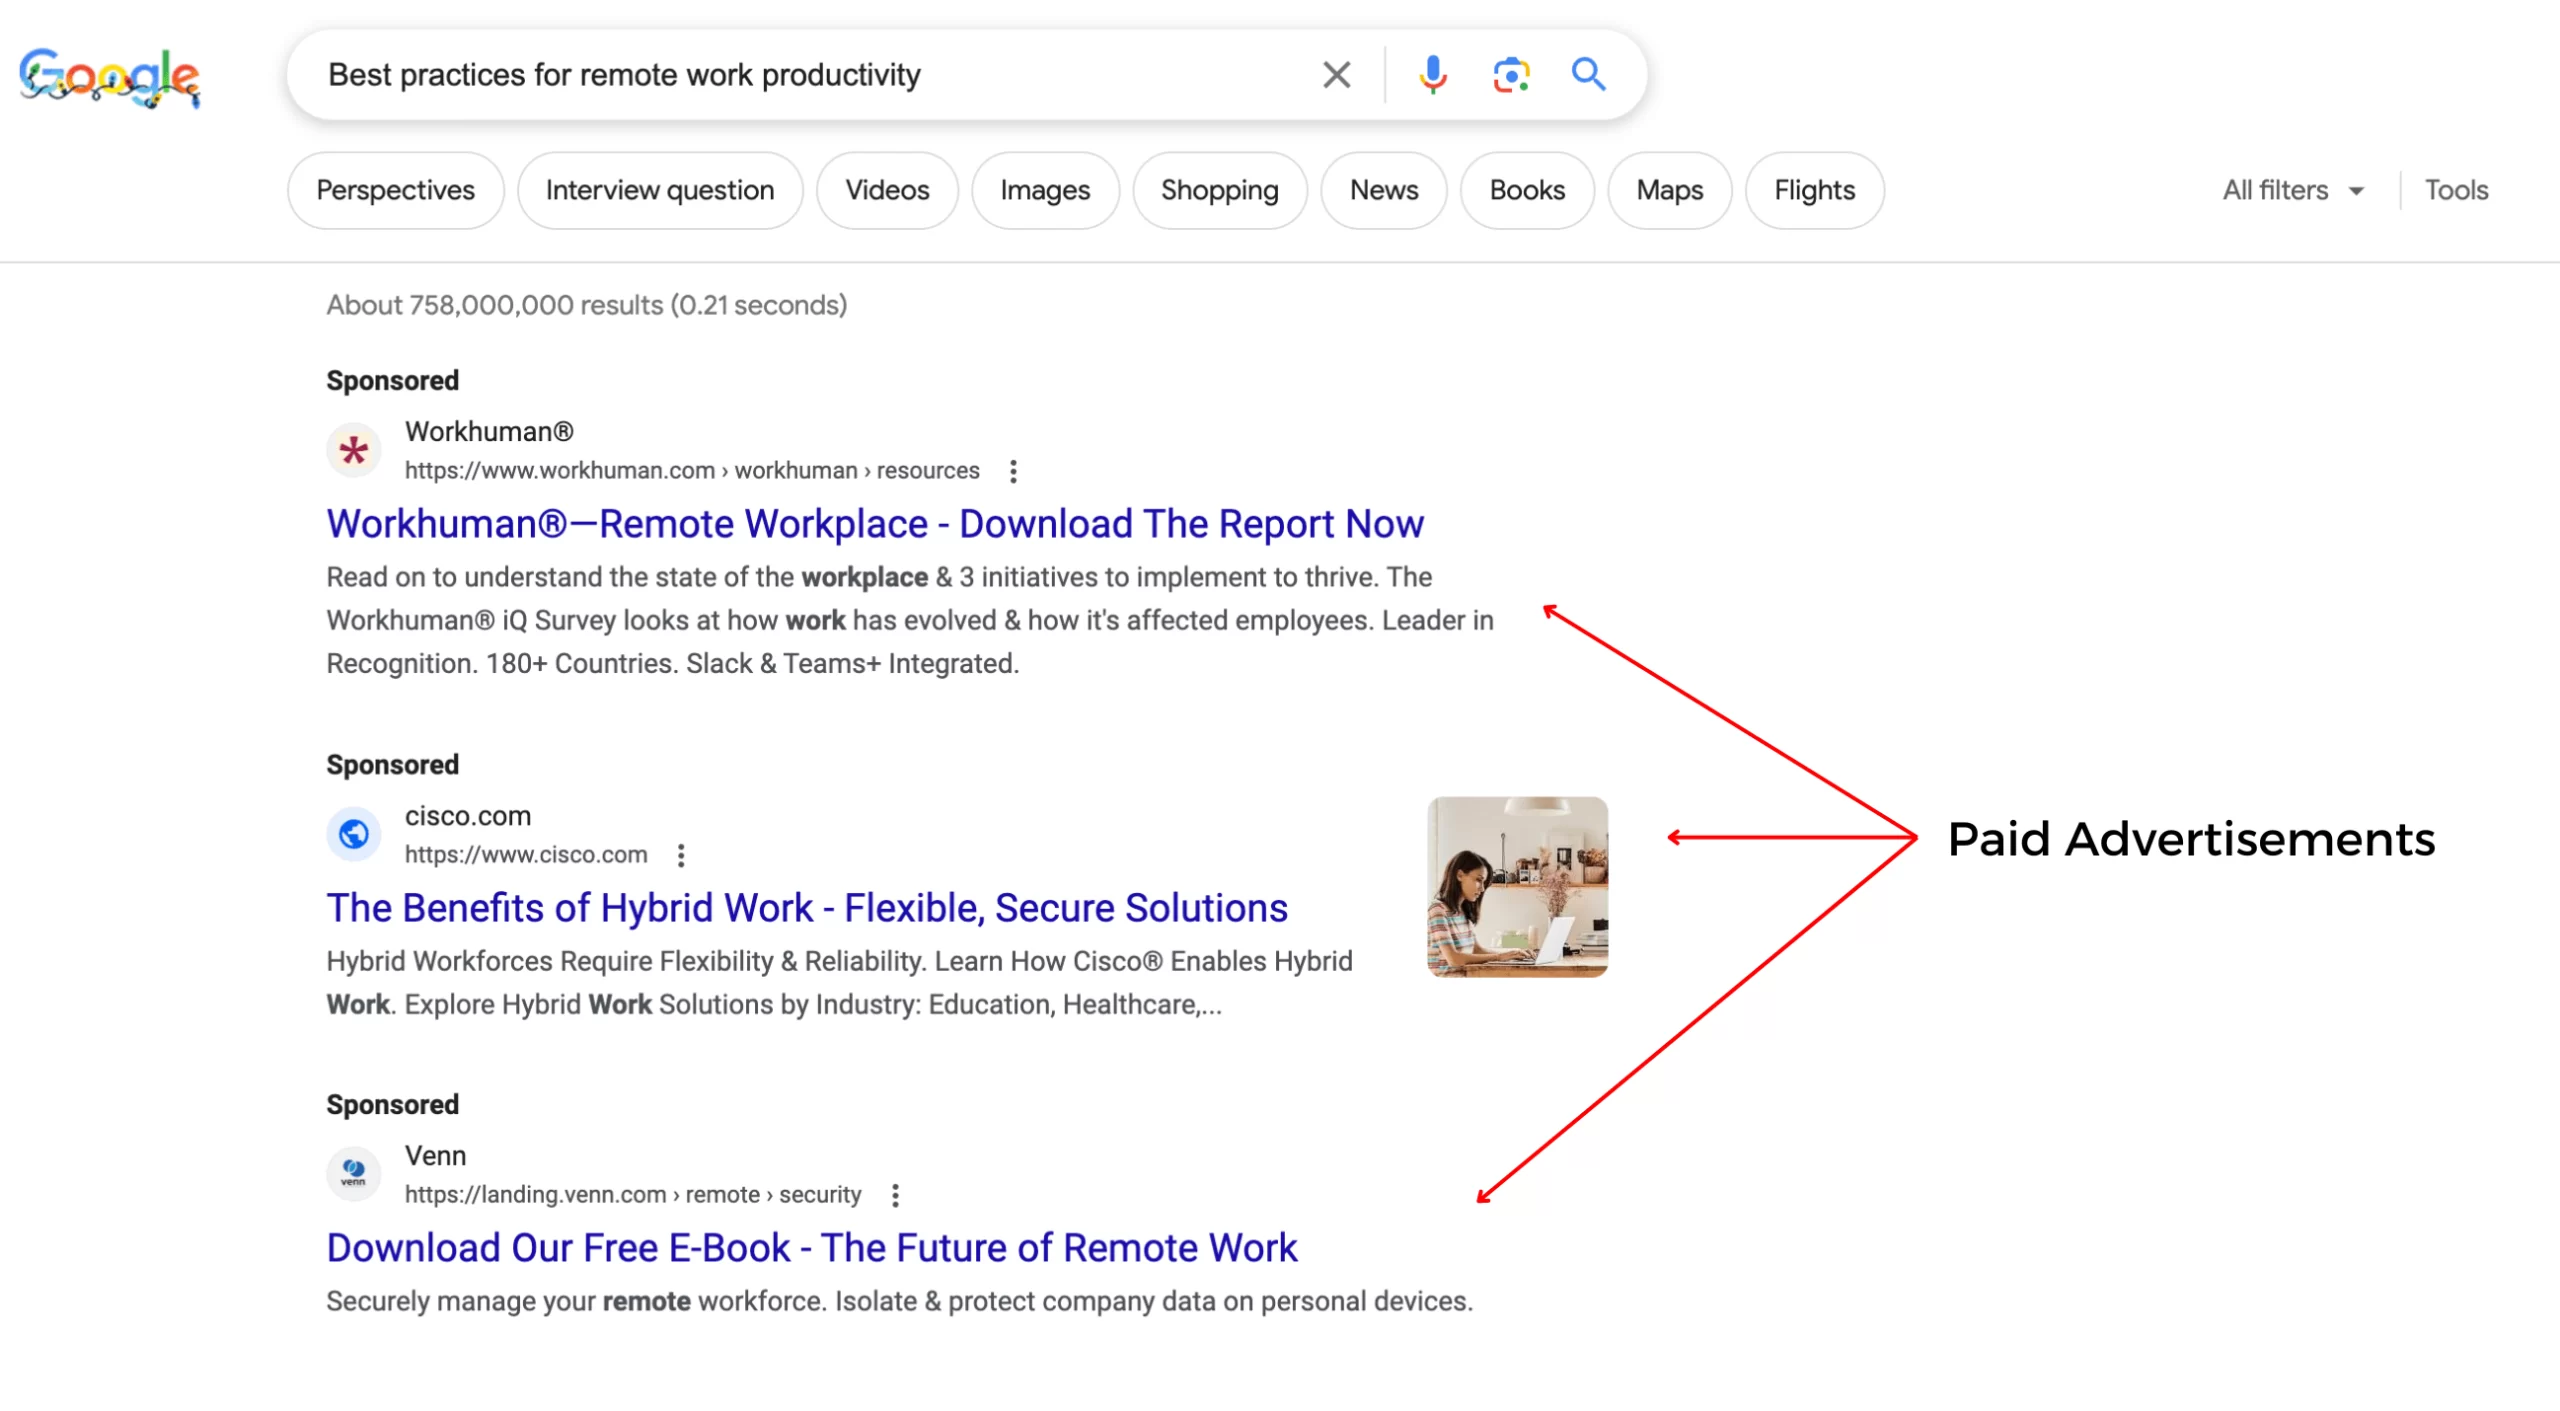 SERP highlighting examples of paid advertisements